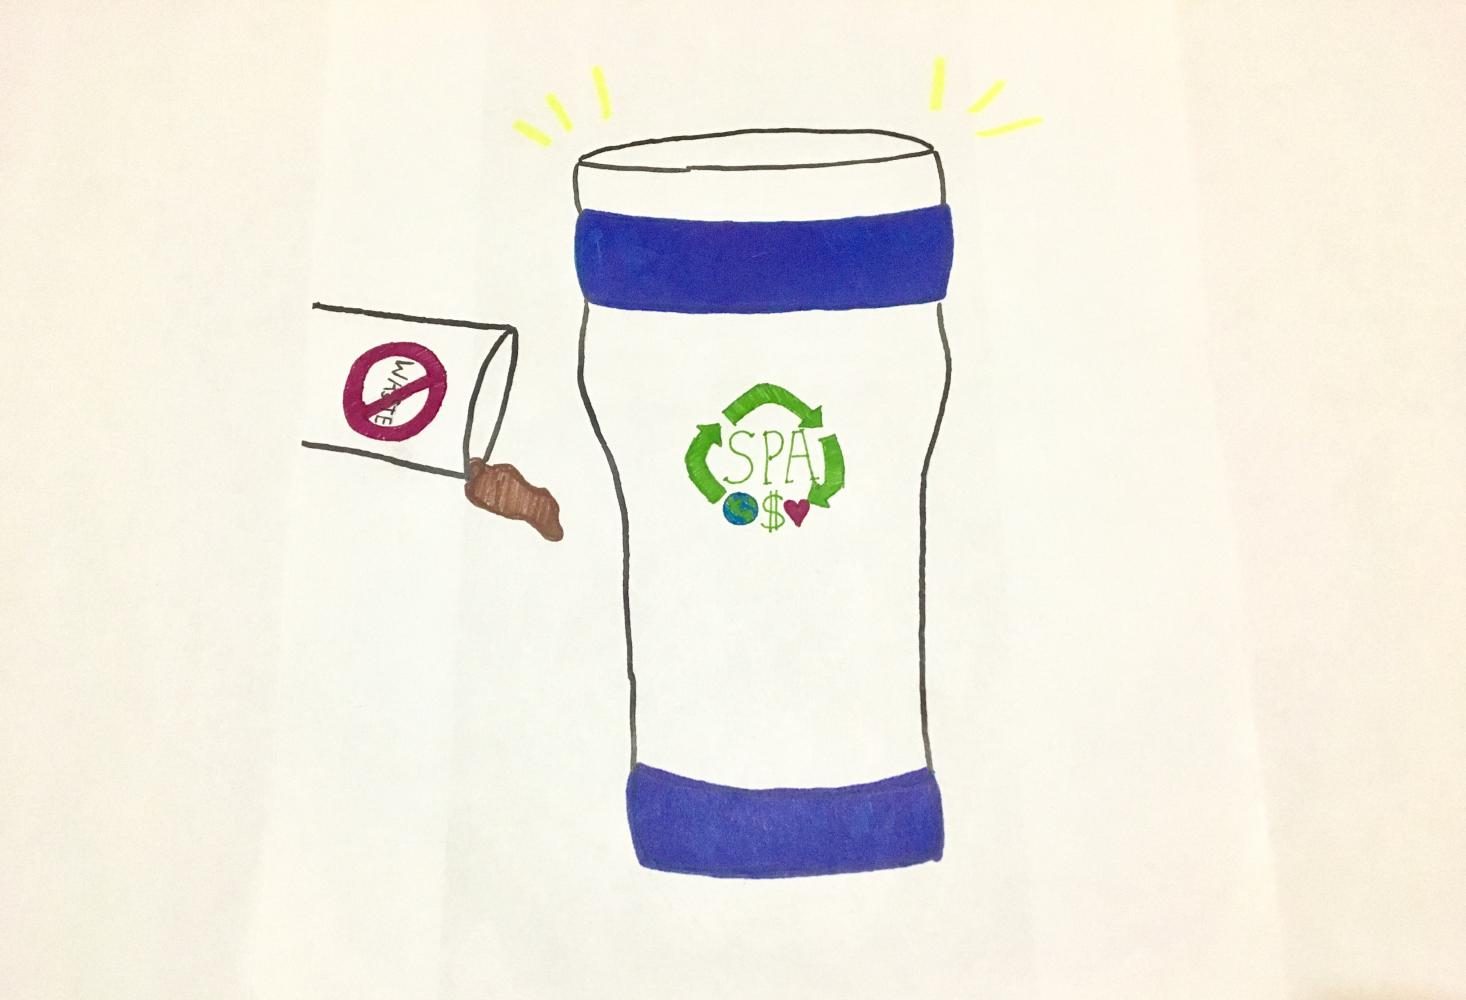 USCs+initiative+to+remove+disposable+cups+and+host+a+reusable+mug+sale+came+with+pros+and+cons.+